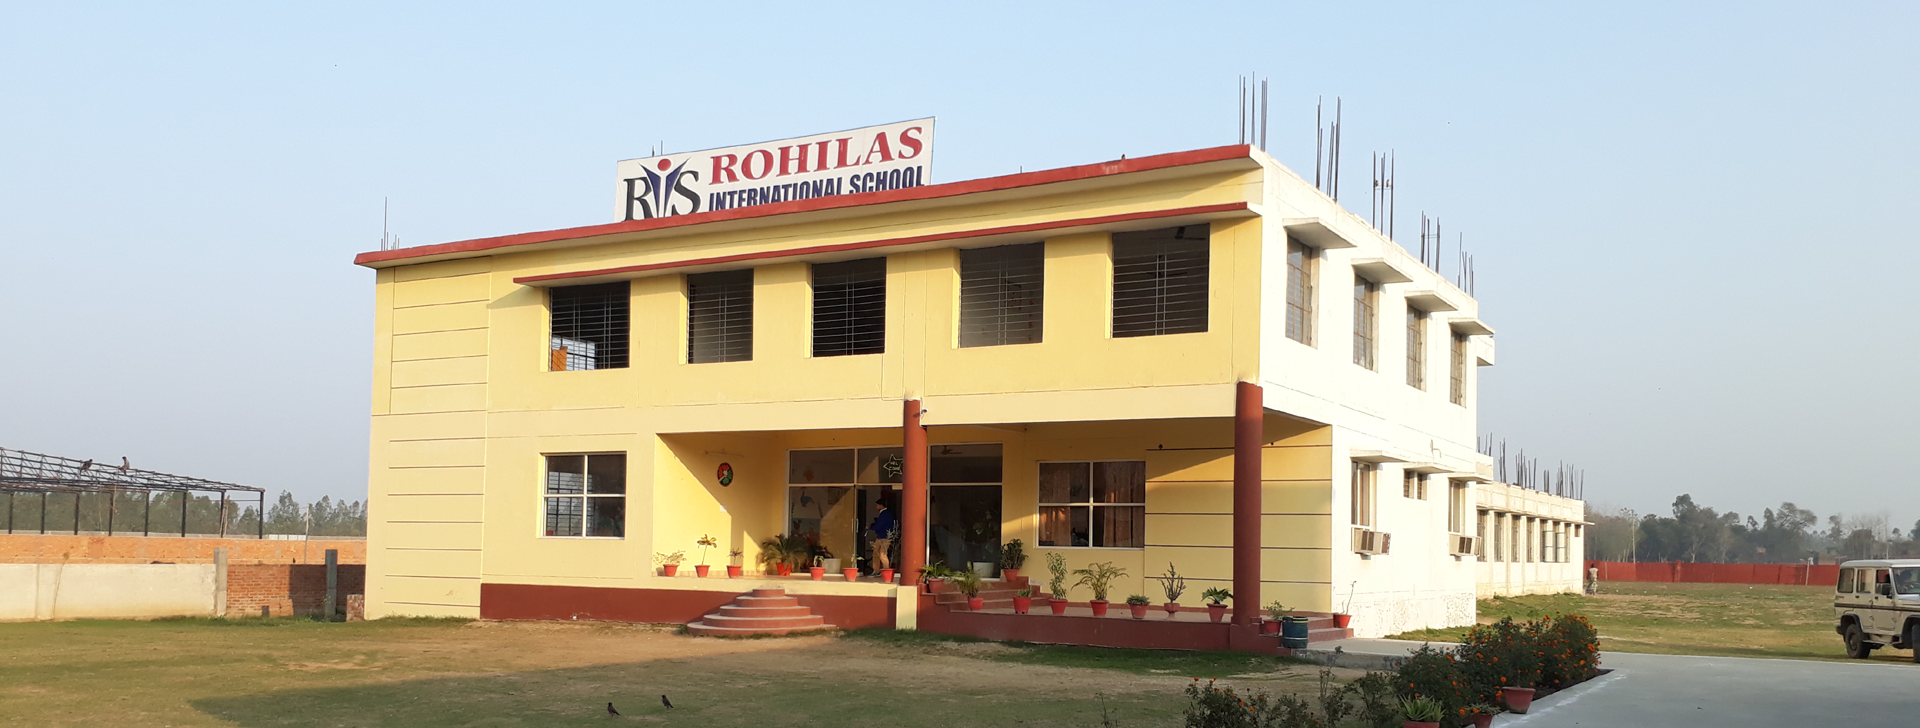 Rohilas International School Bareilly - Fee Structure and Admission 